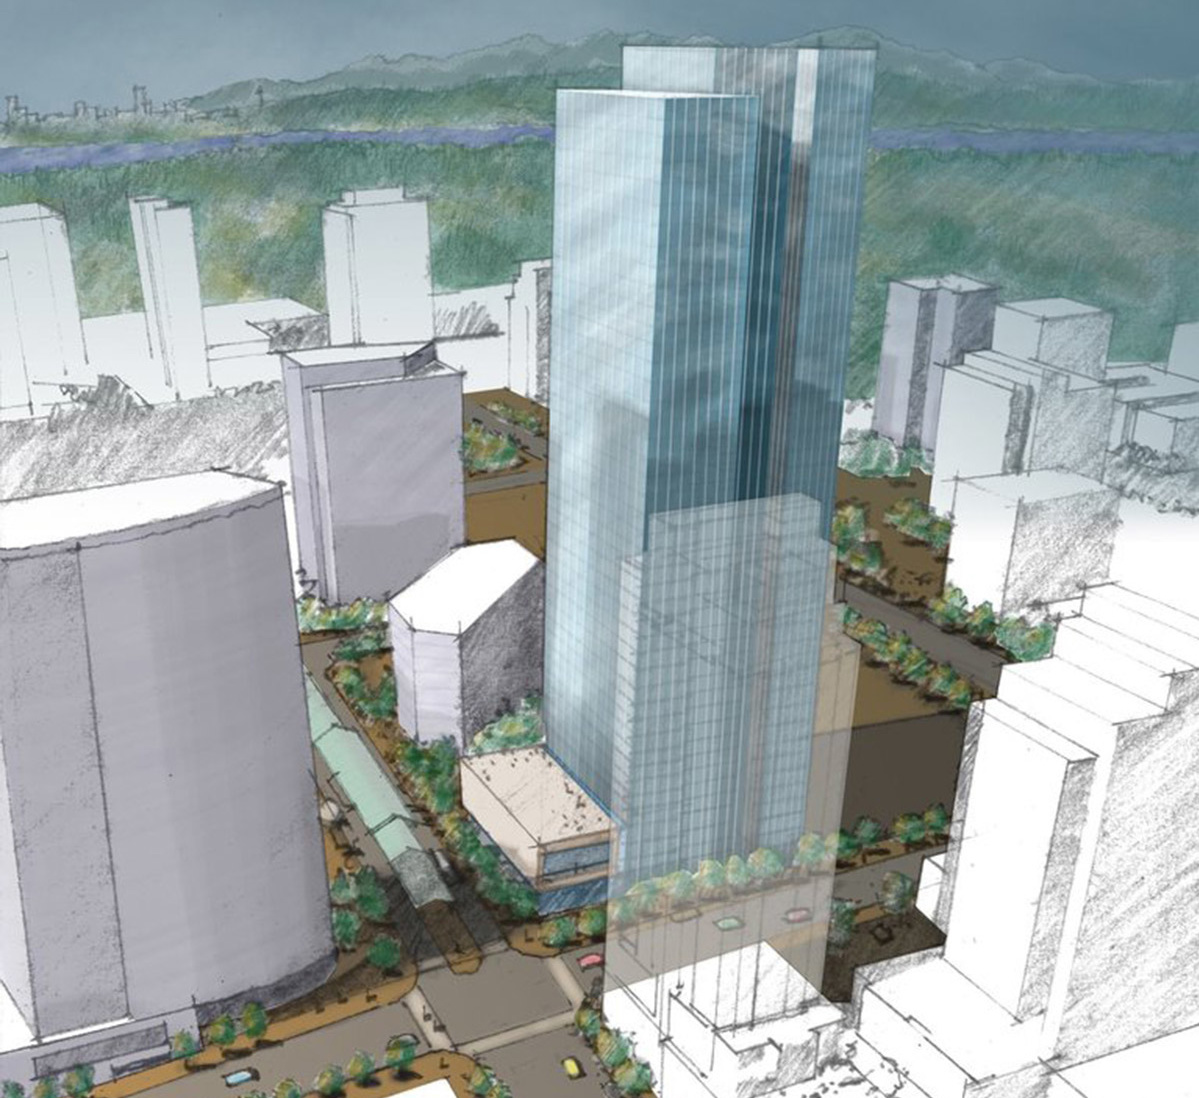 Rendering of a tall tower in opaque blue outline, the possible future site of Amazon offices